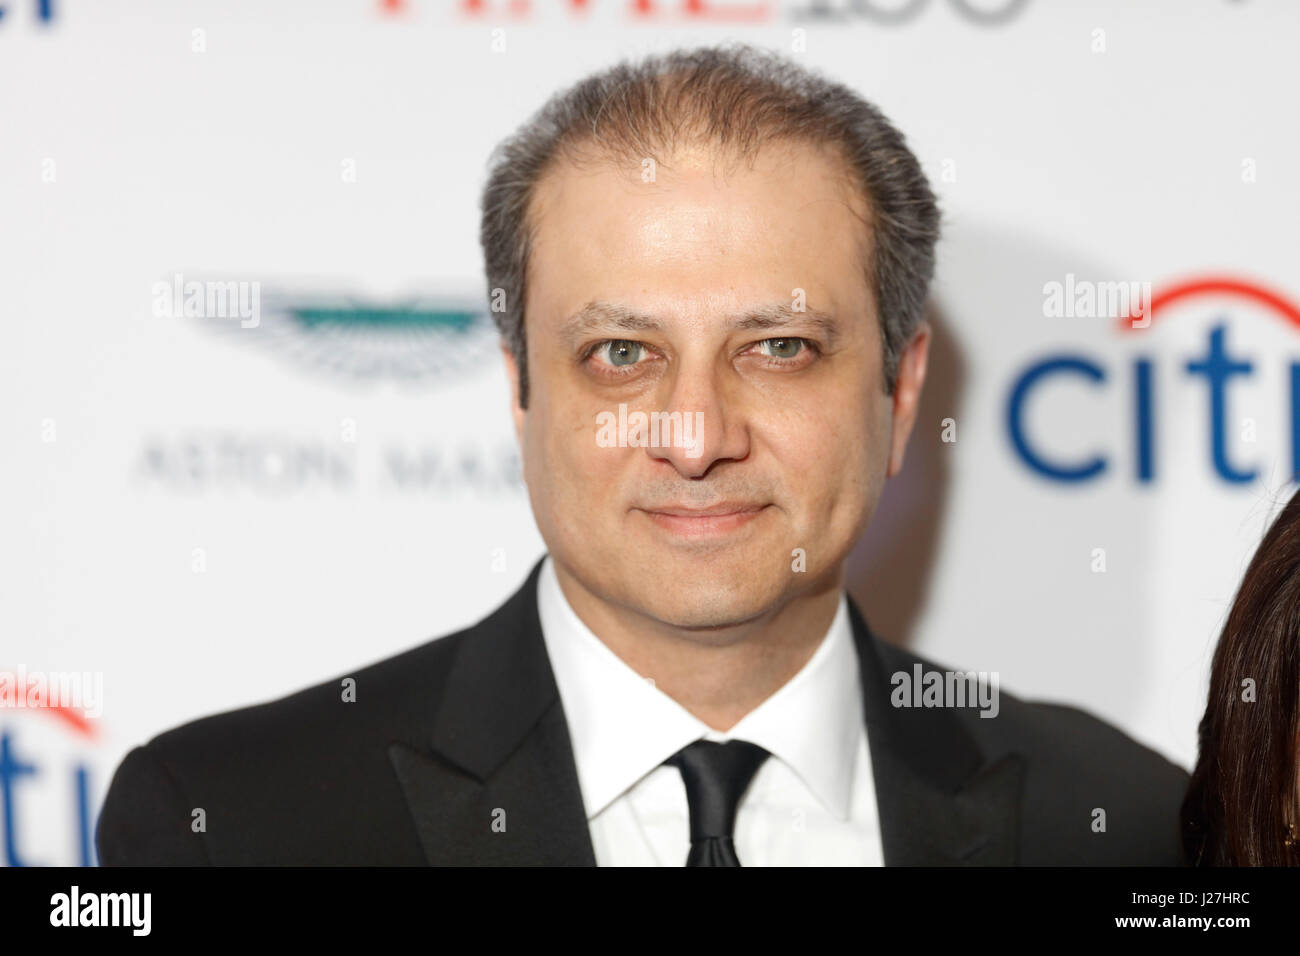 New York, USA. 25th Apr, 2017.  Preet Bharara attends the 2017 Time 100 Gala at Jazz at Lincoln Center on April 25, 2017 in New York City. Credit: The Photo Access/Alamy Live News Stock Photo